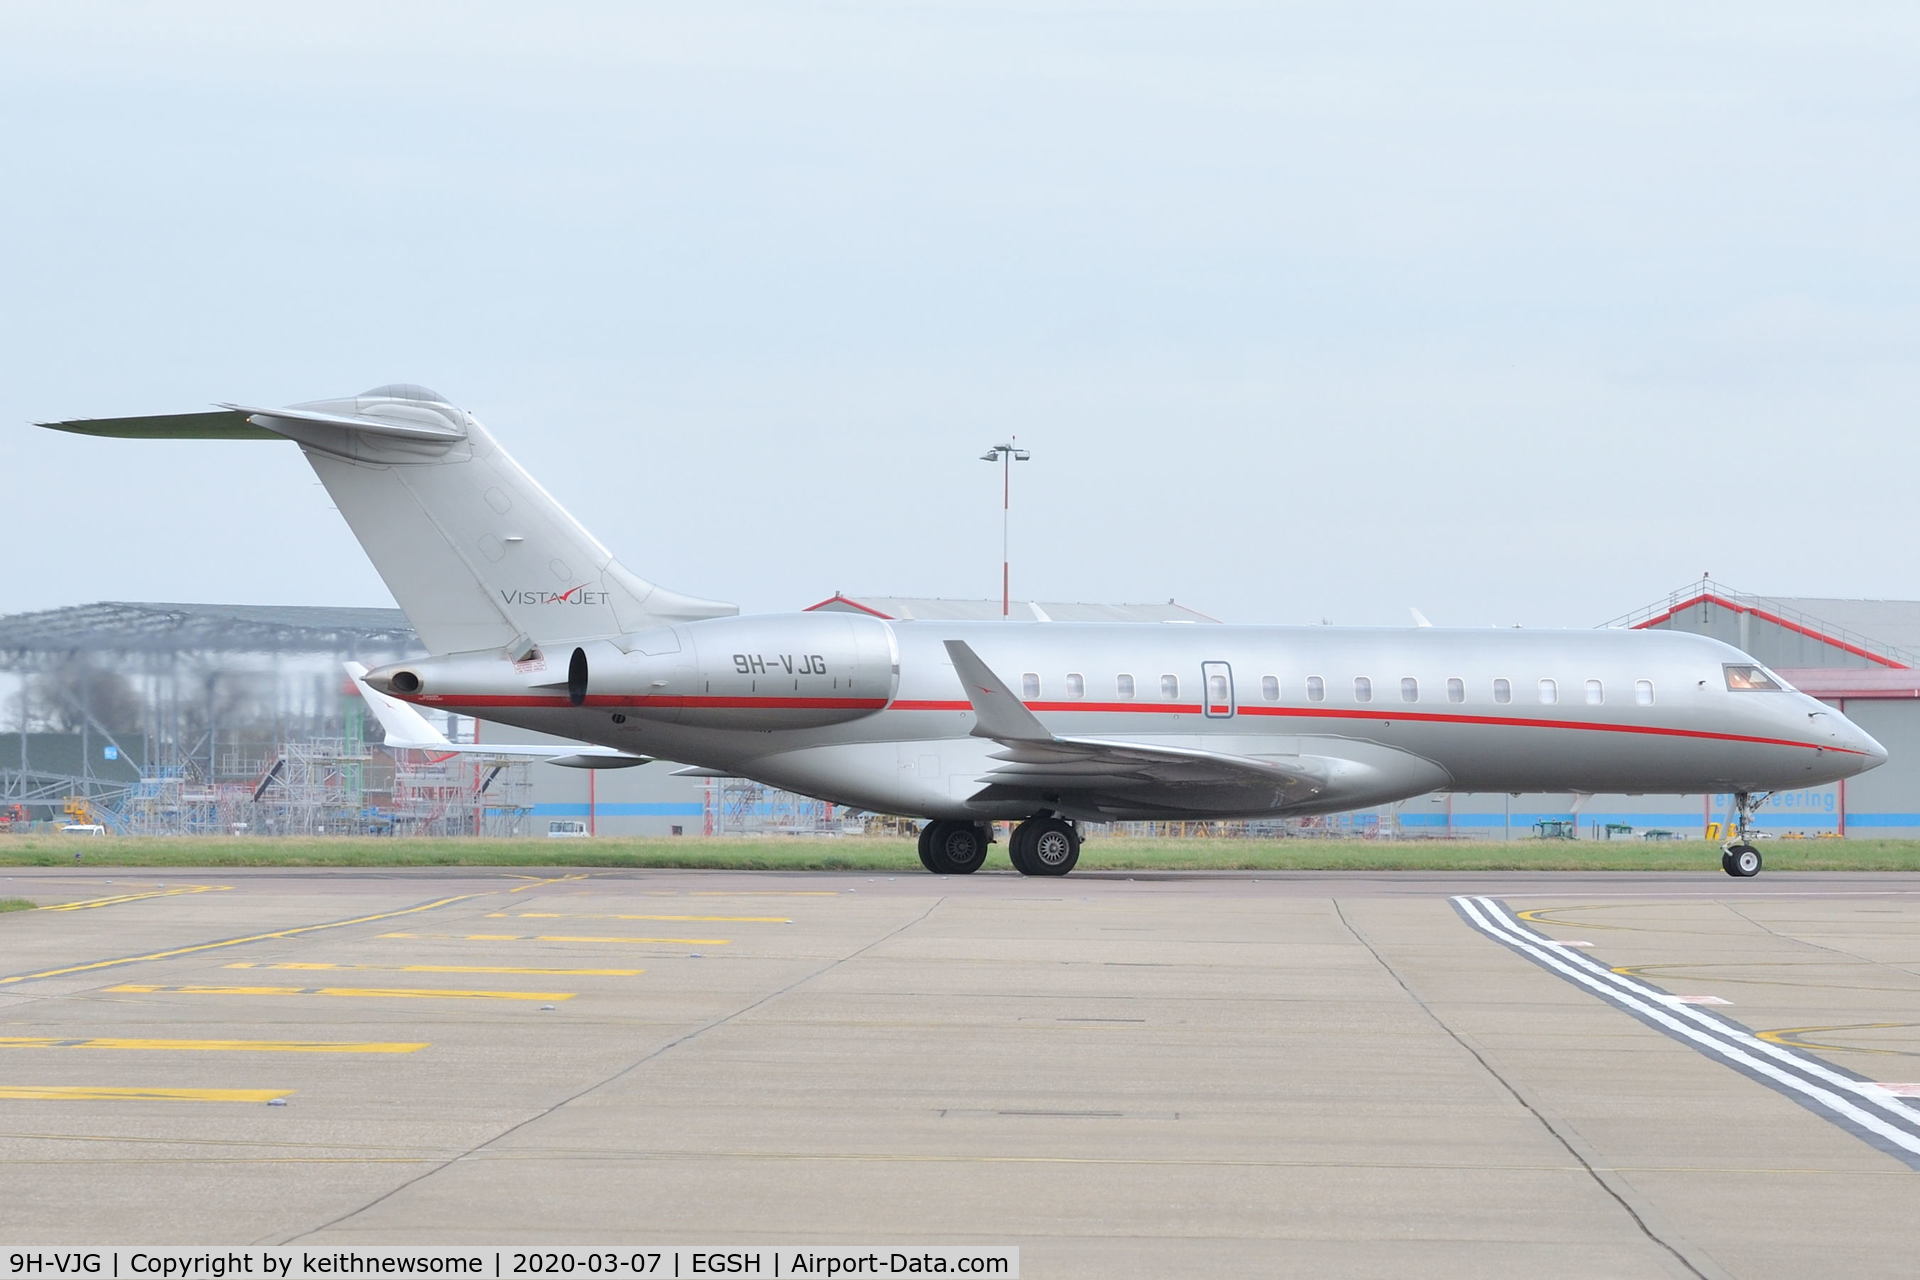 9H-VJG, 2013 Bombardier BD-700-1A10 Global 6000 C/N 9580, Arriving at Norwich from Luton.